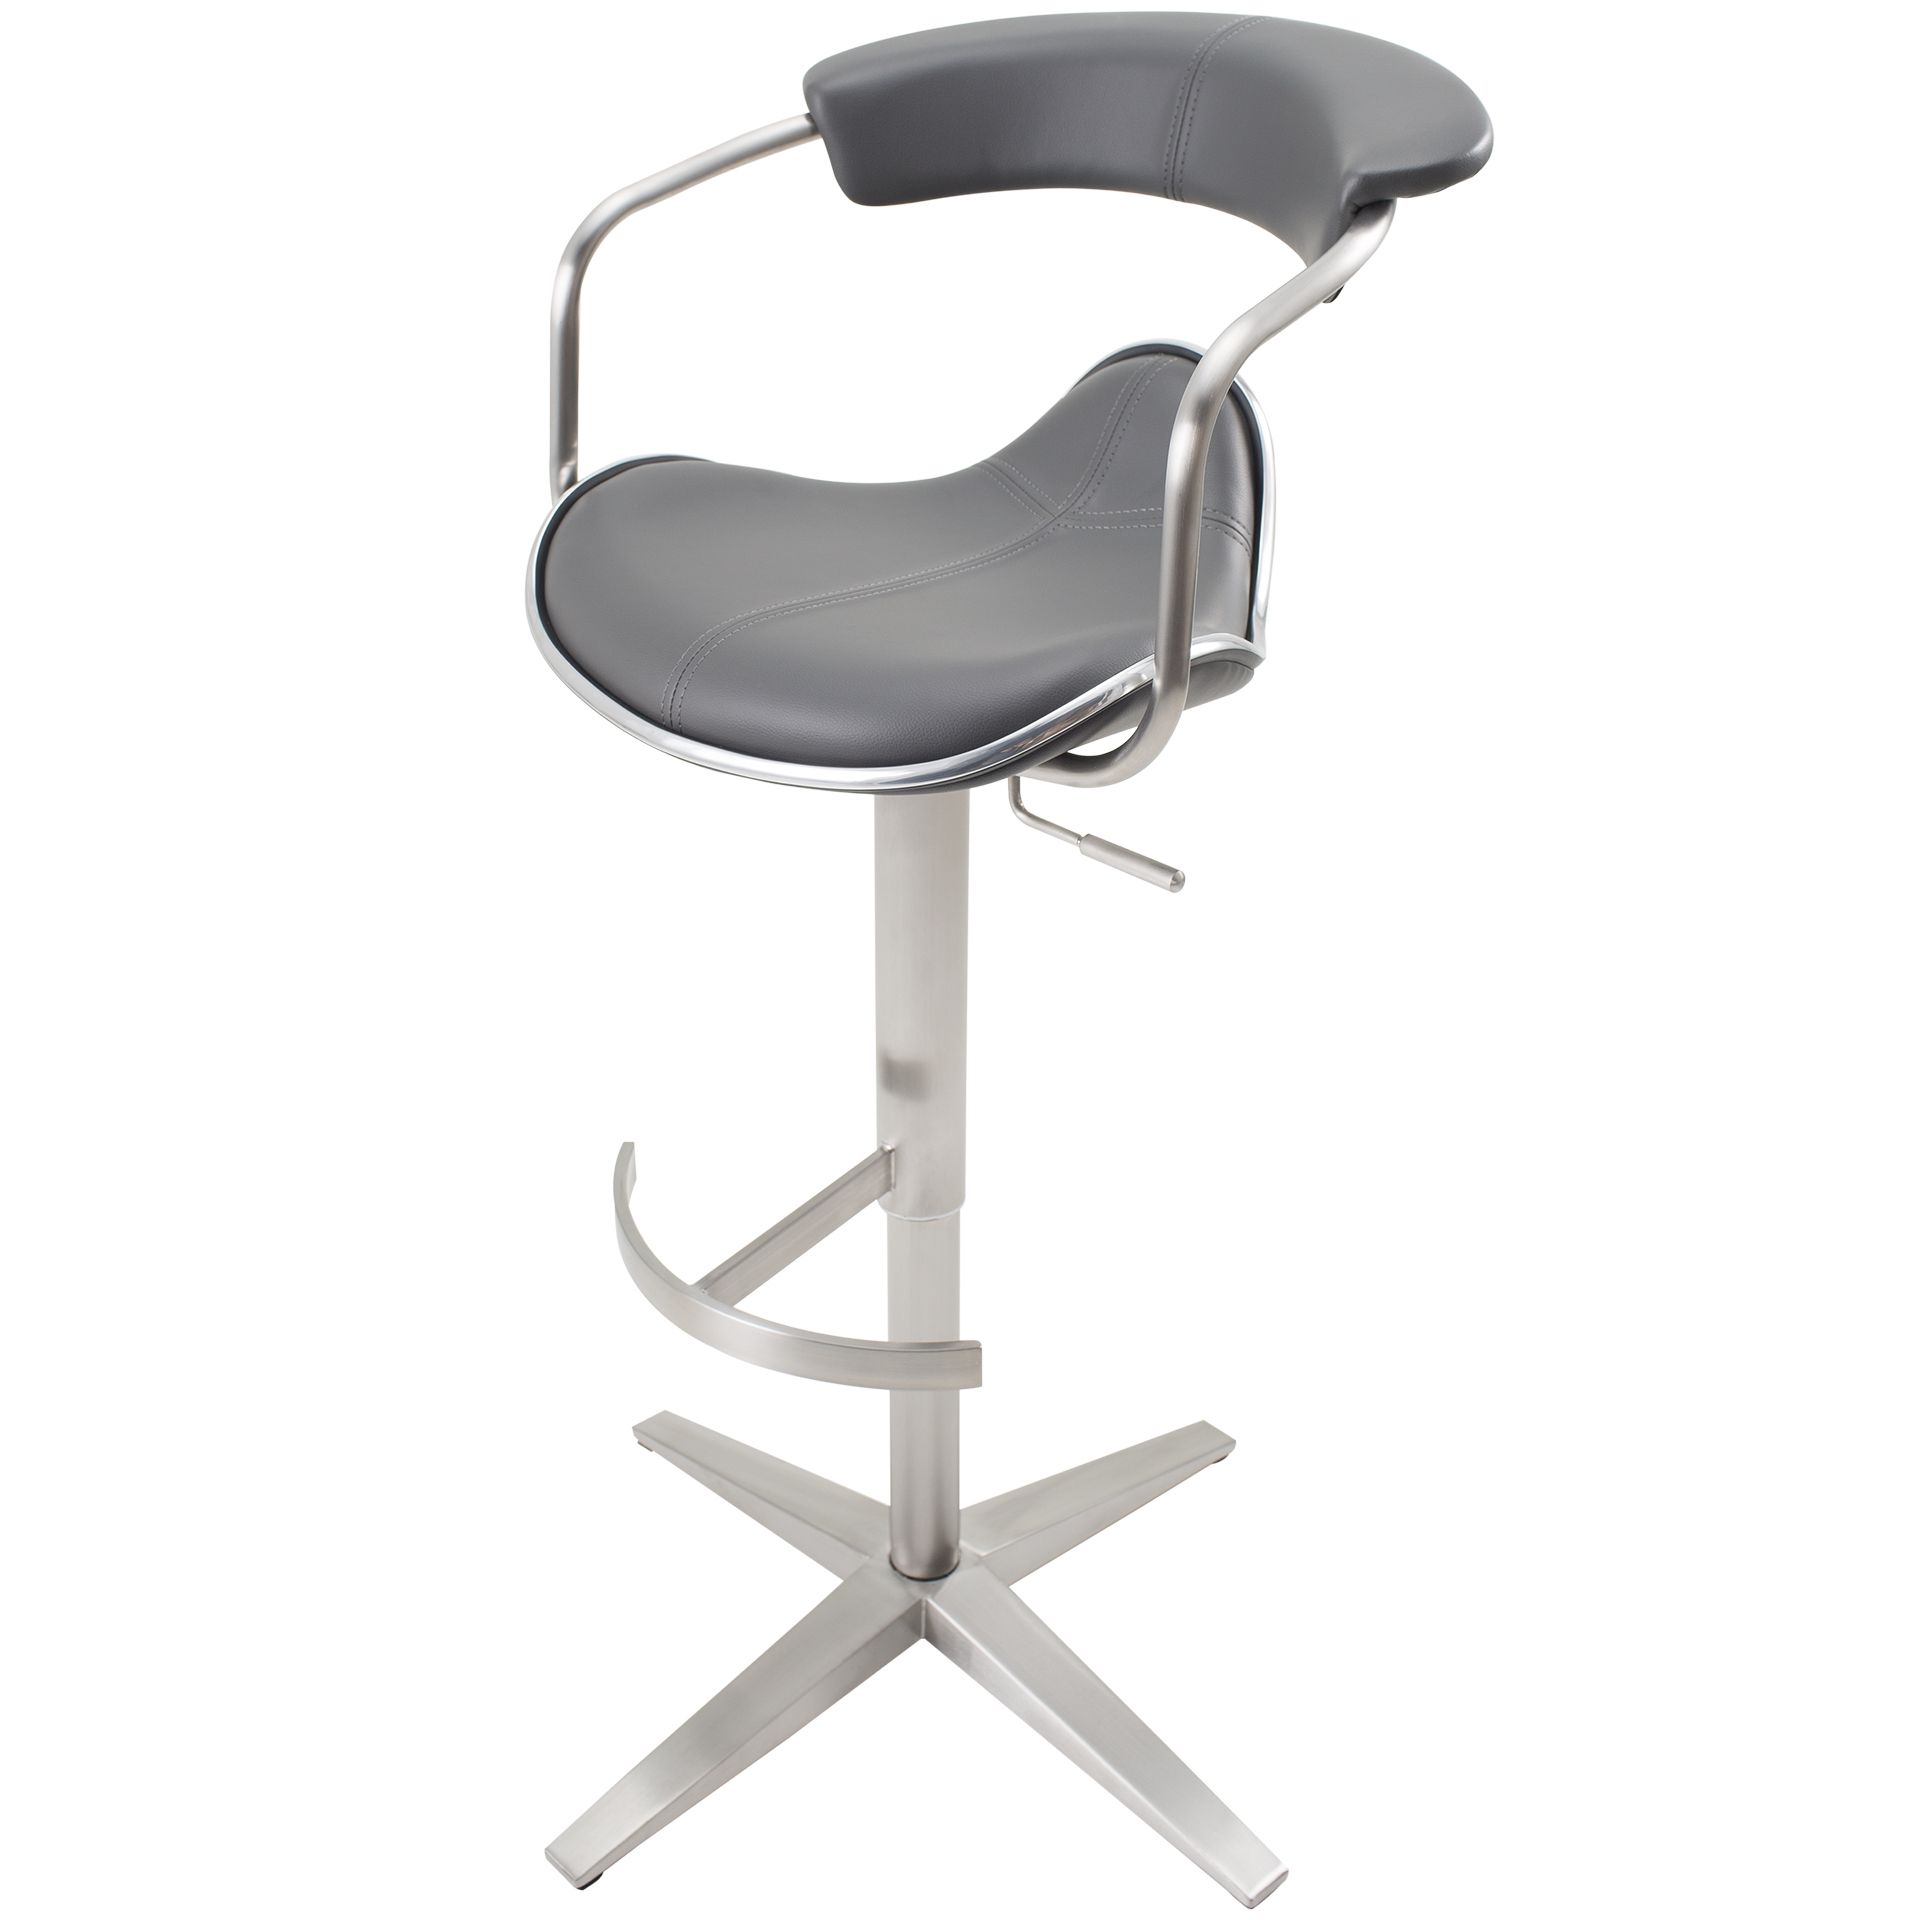 Gray Nickel Stools Regarding Preferred Primo Brushed Stainless Steel Adjustable Height Swivel Stool With Arms (View 4 of 10)